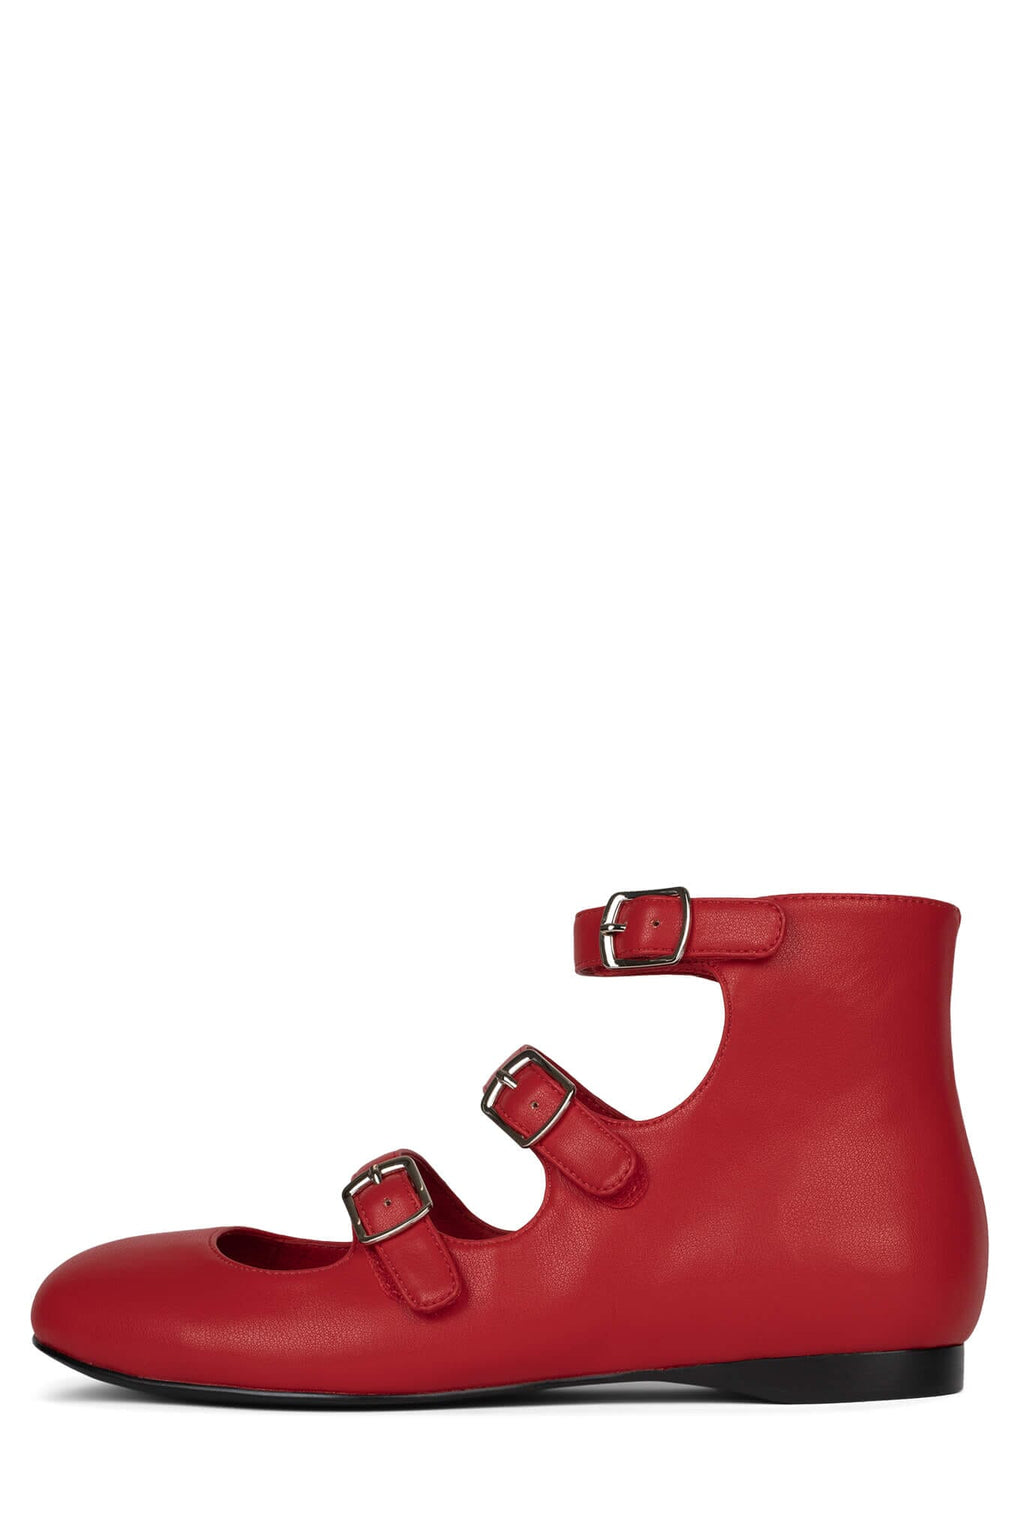 TALENTED Jeffrey Campbell Red 6 